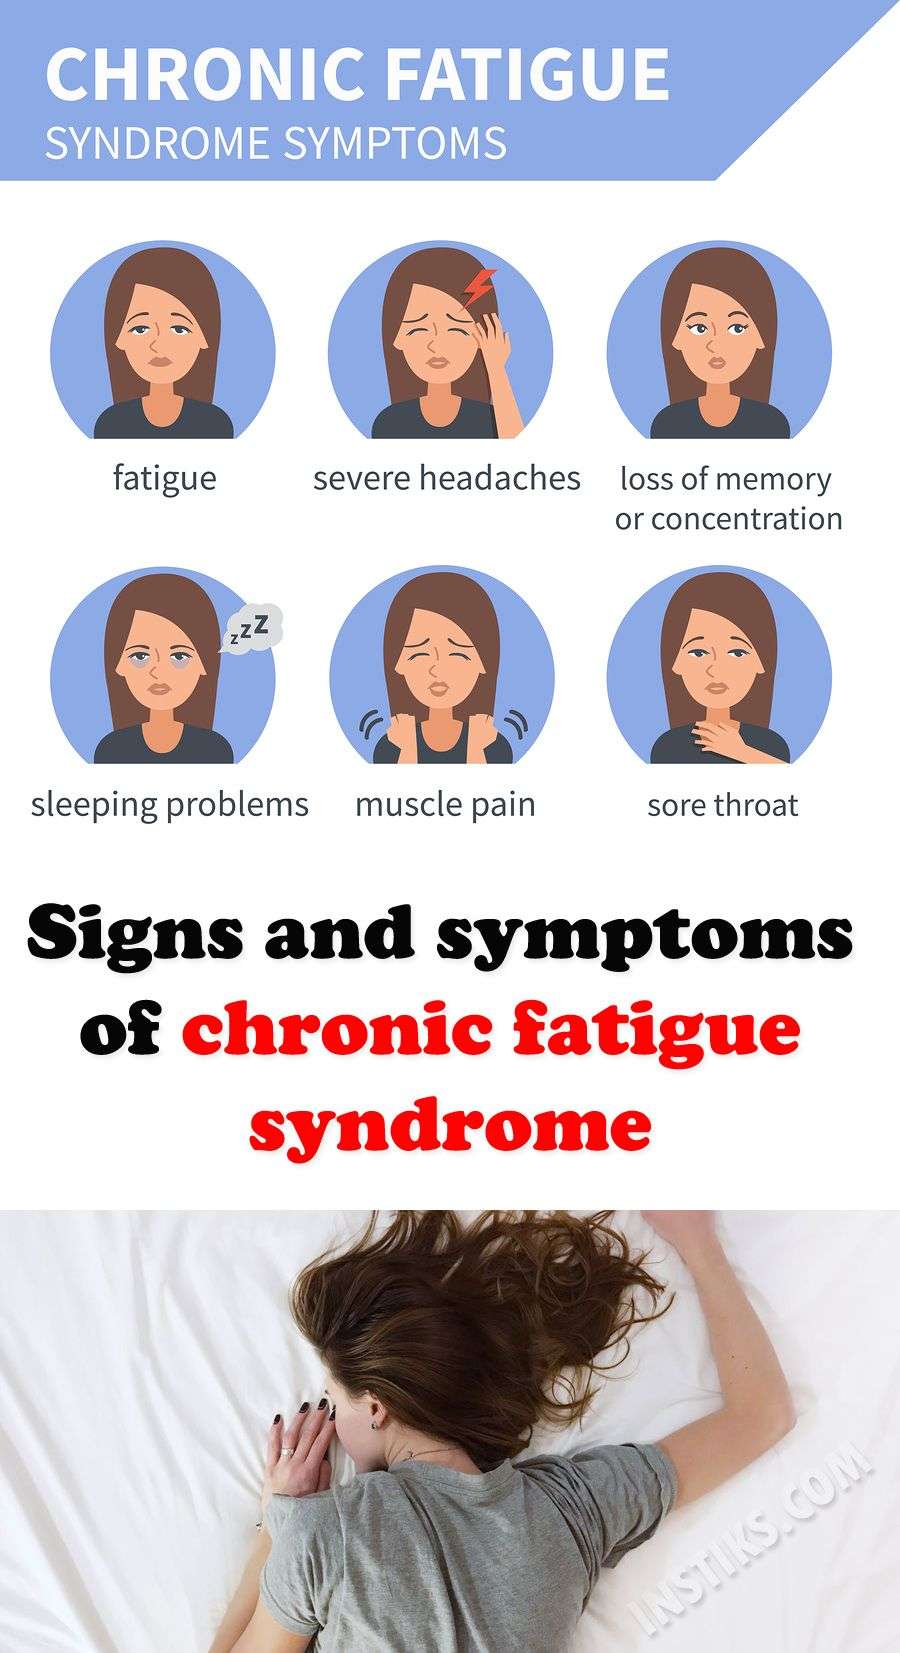 Signs and symptoms of chronic fatigue syndrome